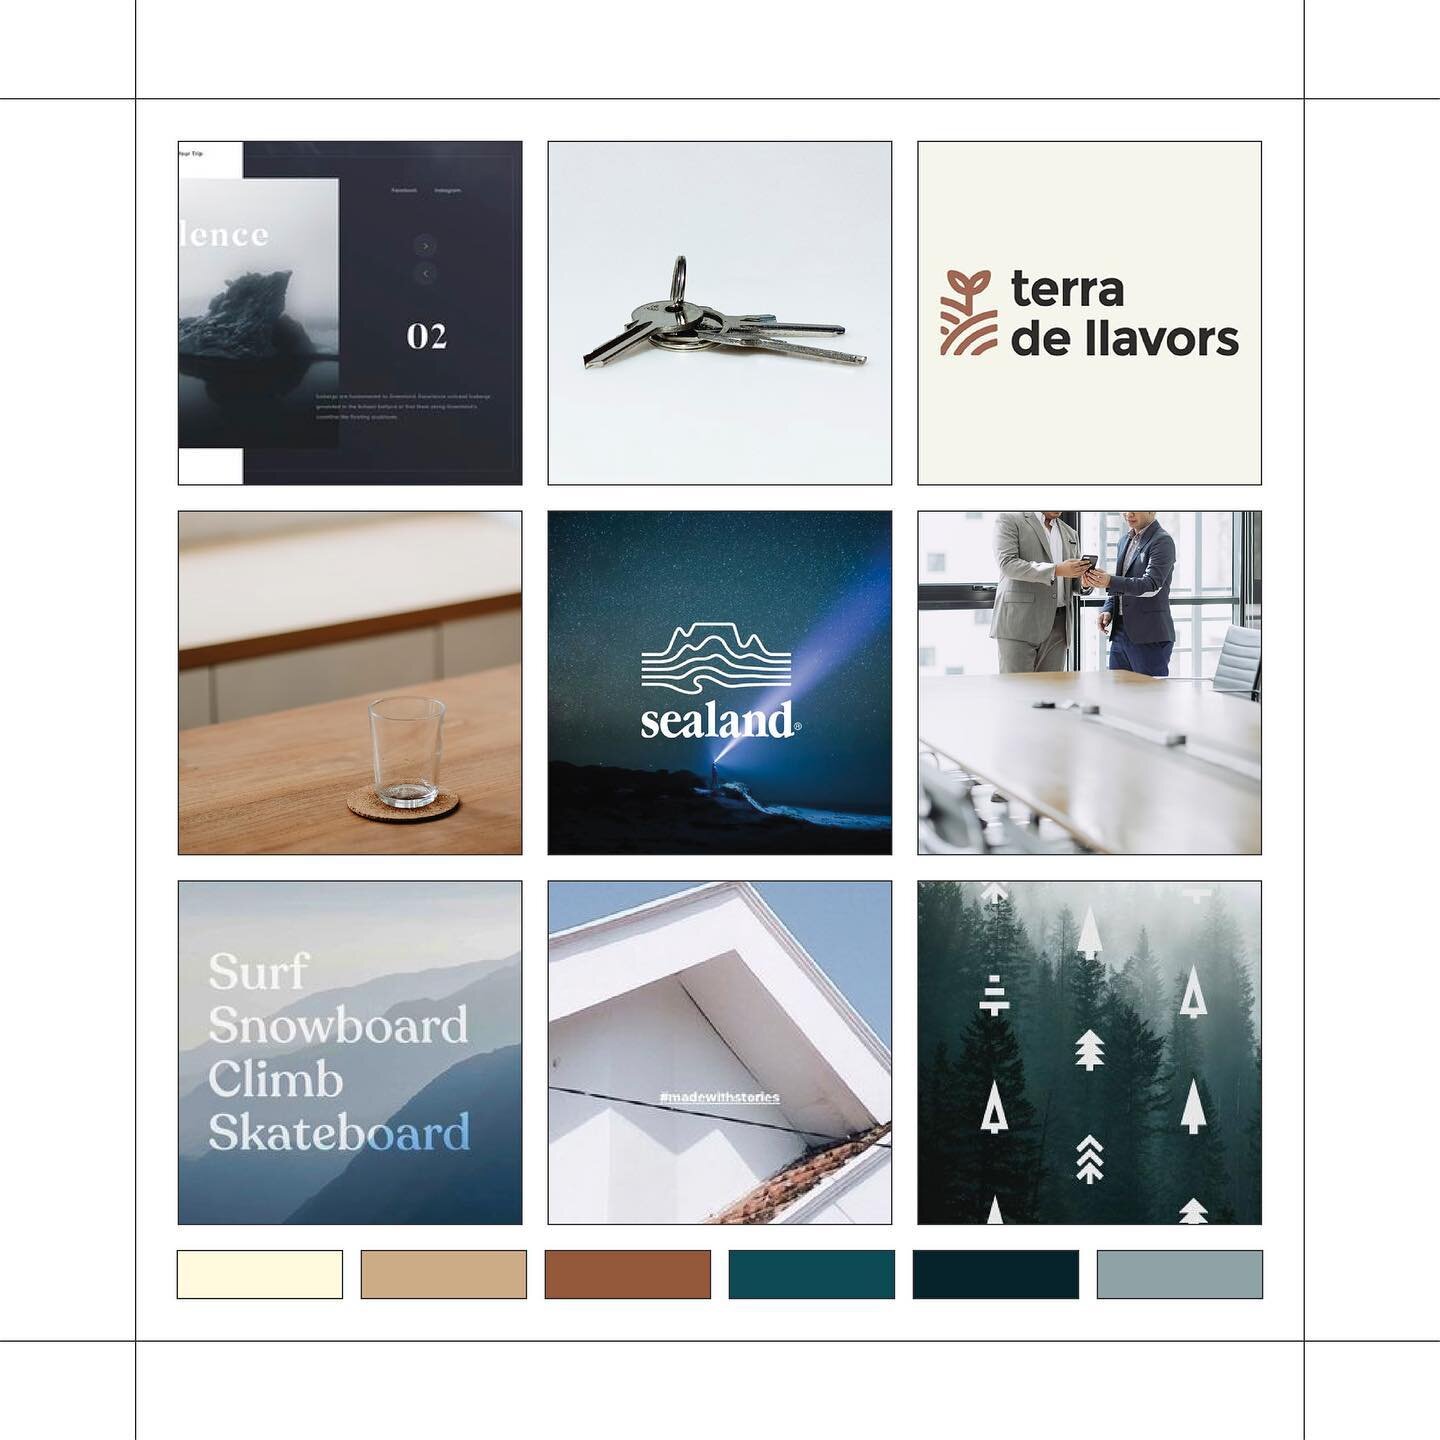 Outdoorsy, refreshing, and modern moodboard. 💫

Combining an earthy color palette, serif fonts, and thick, clean lines creates a polished yet inviting mood.

The moodboard stage in the branding process is one of my favorites because not only does it